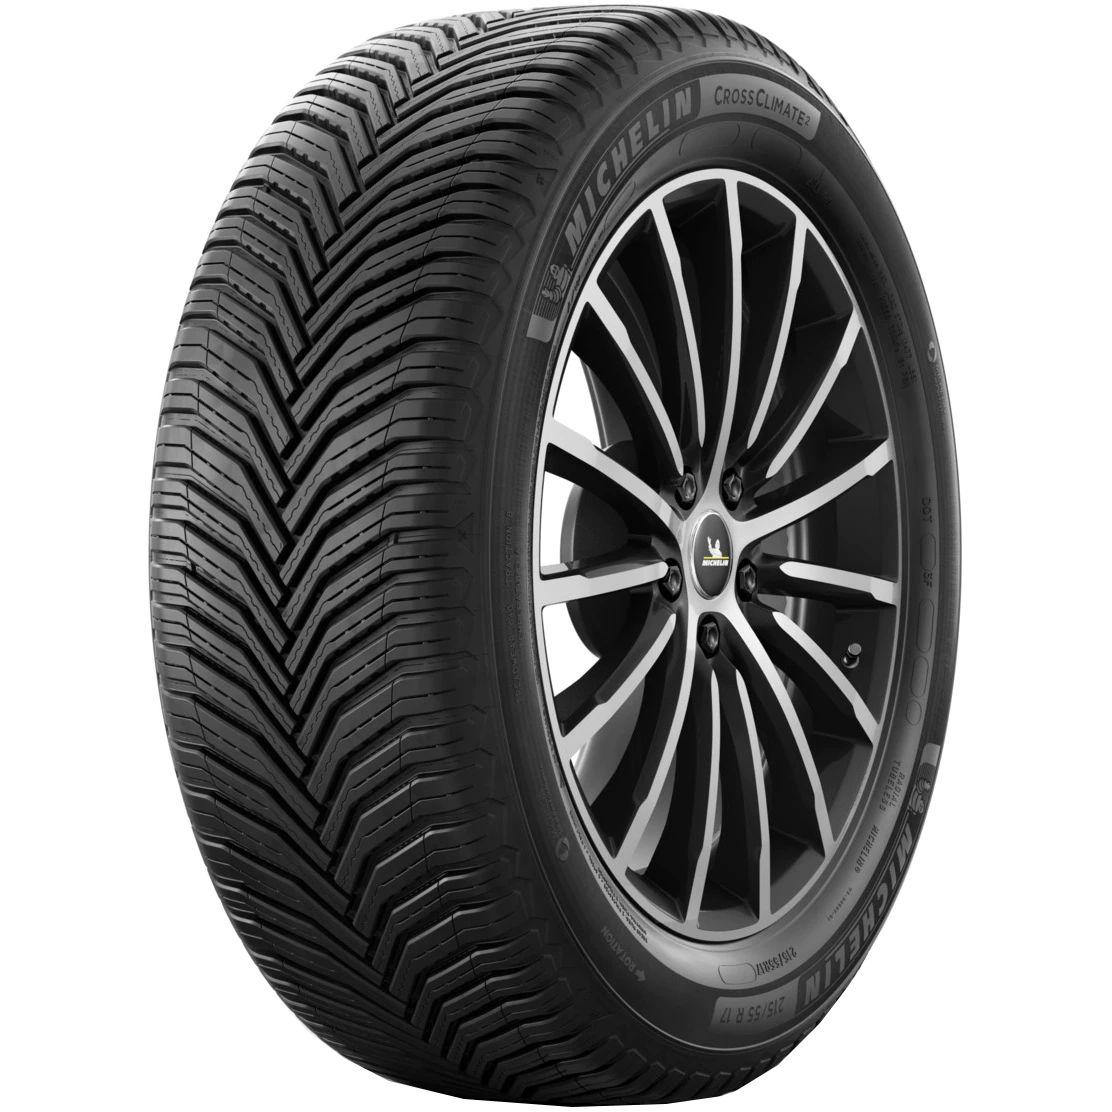 Anvelope all seasons MICHELIN CrossClimate2 M+S 225/40 R18 92Y